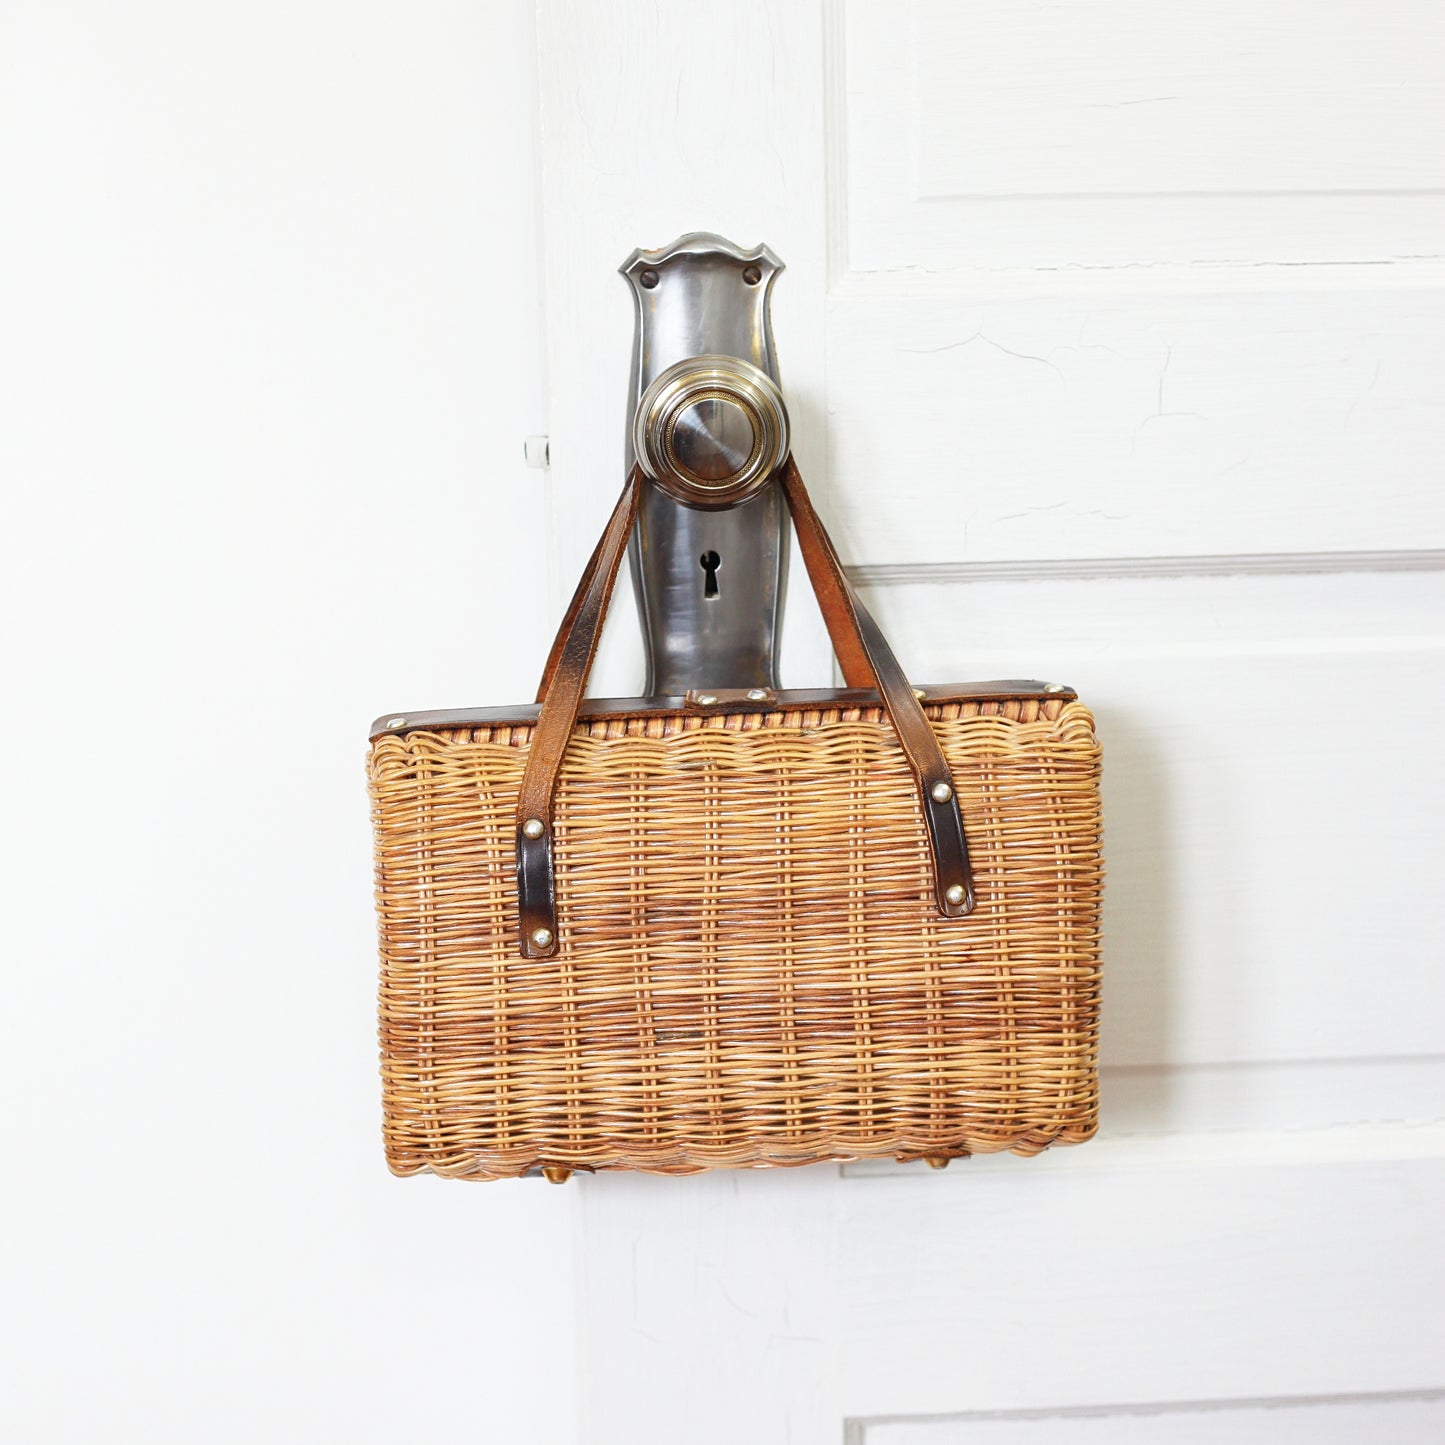 SOLD - Vintage Woven Basket Purse with Leather Accents